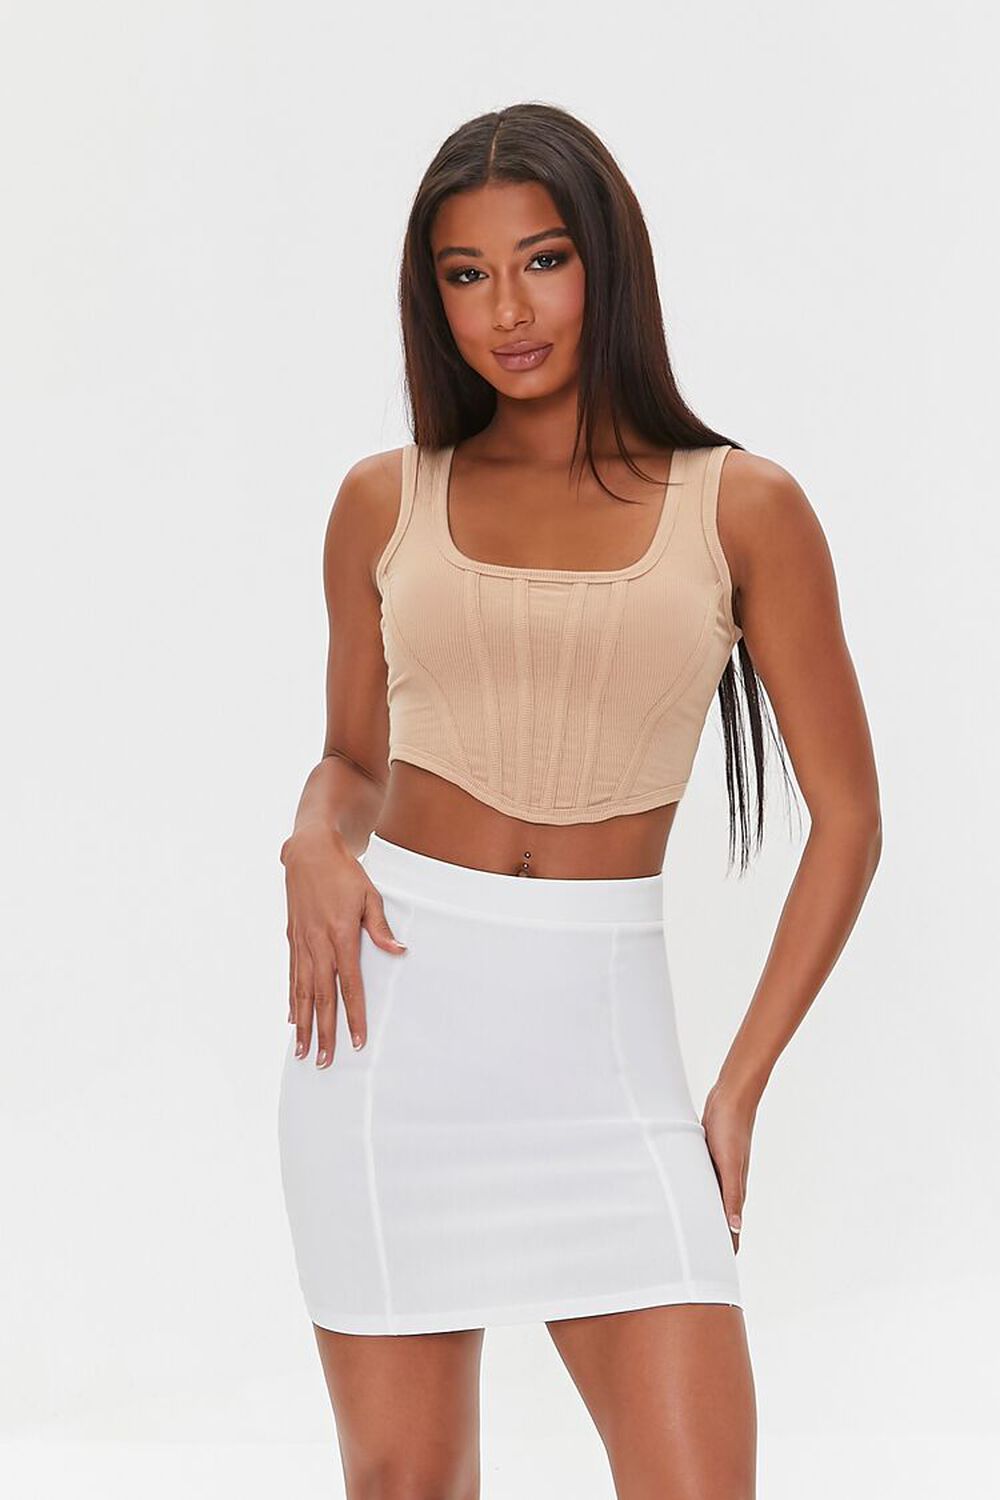 WHITE Fitted Mini Skirt, image 1